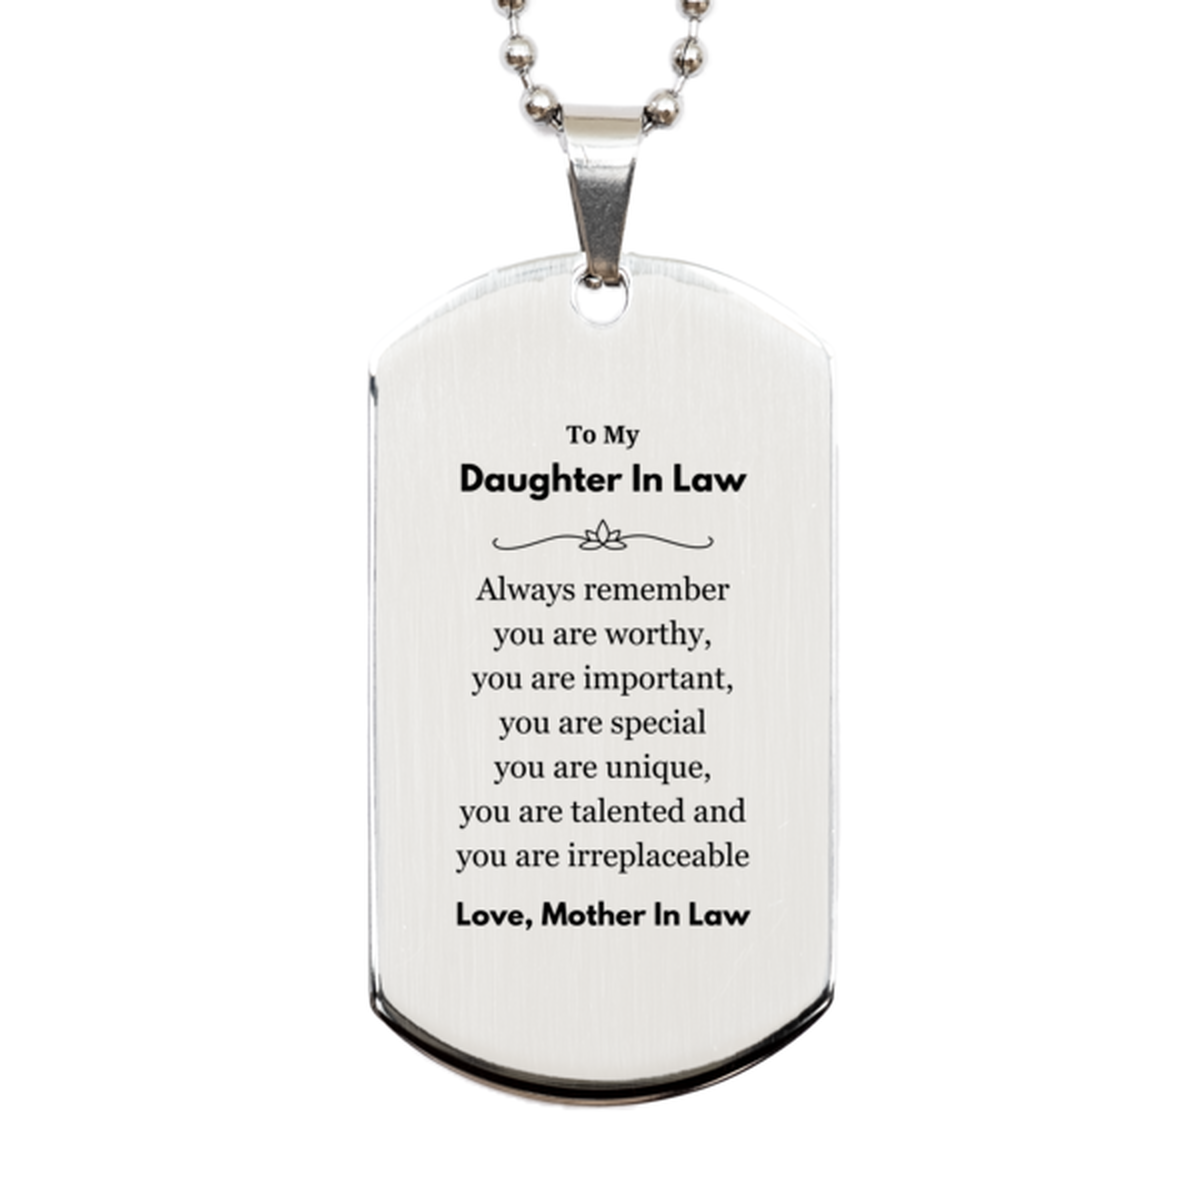 Daughter In Law Birthday Gifts from Mother In Law, Inspirational Silver Dog Tag for Daughter In Law Christmas Graduation Gifts for Daughter In Law Always remember you are worthy, you are important. Love, Mother In Law